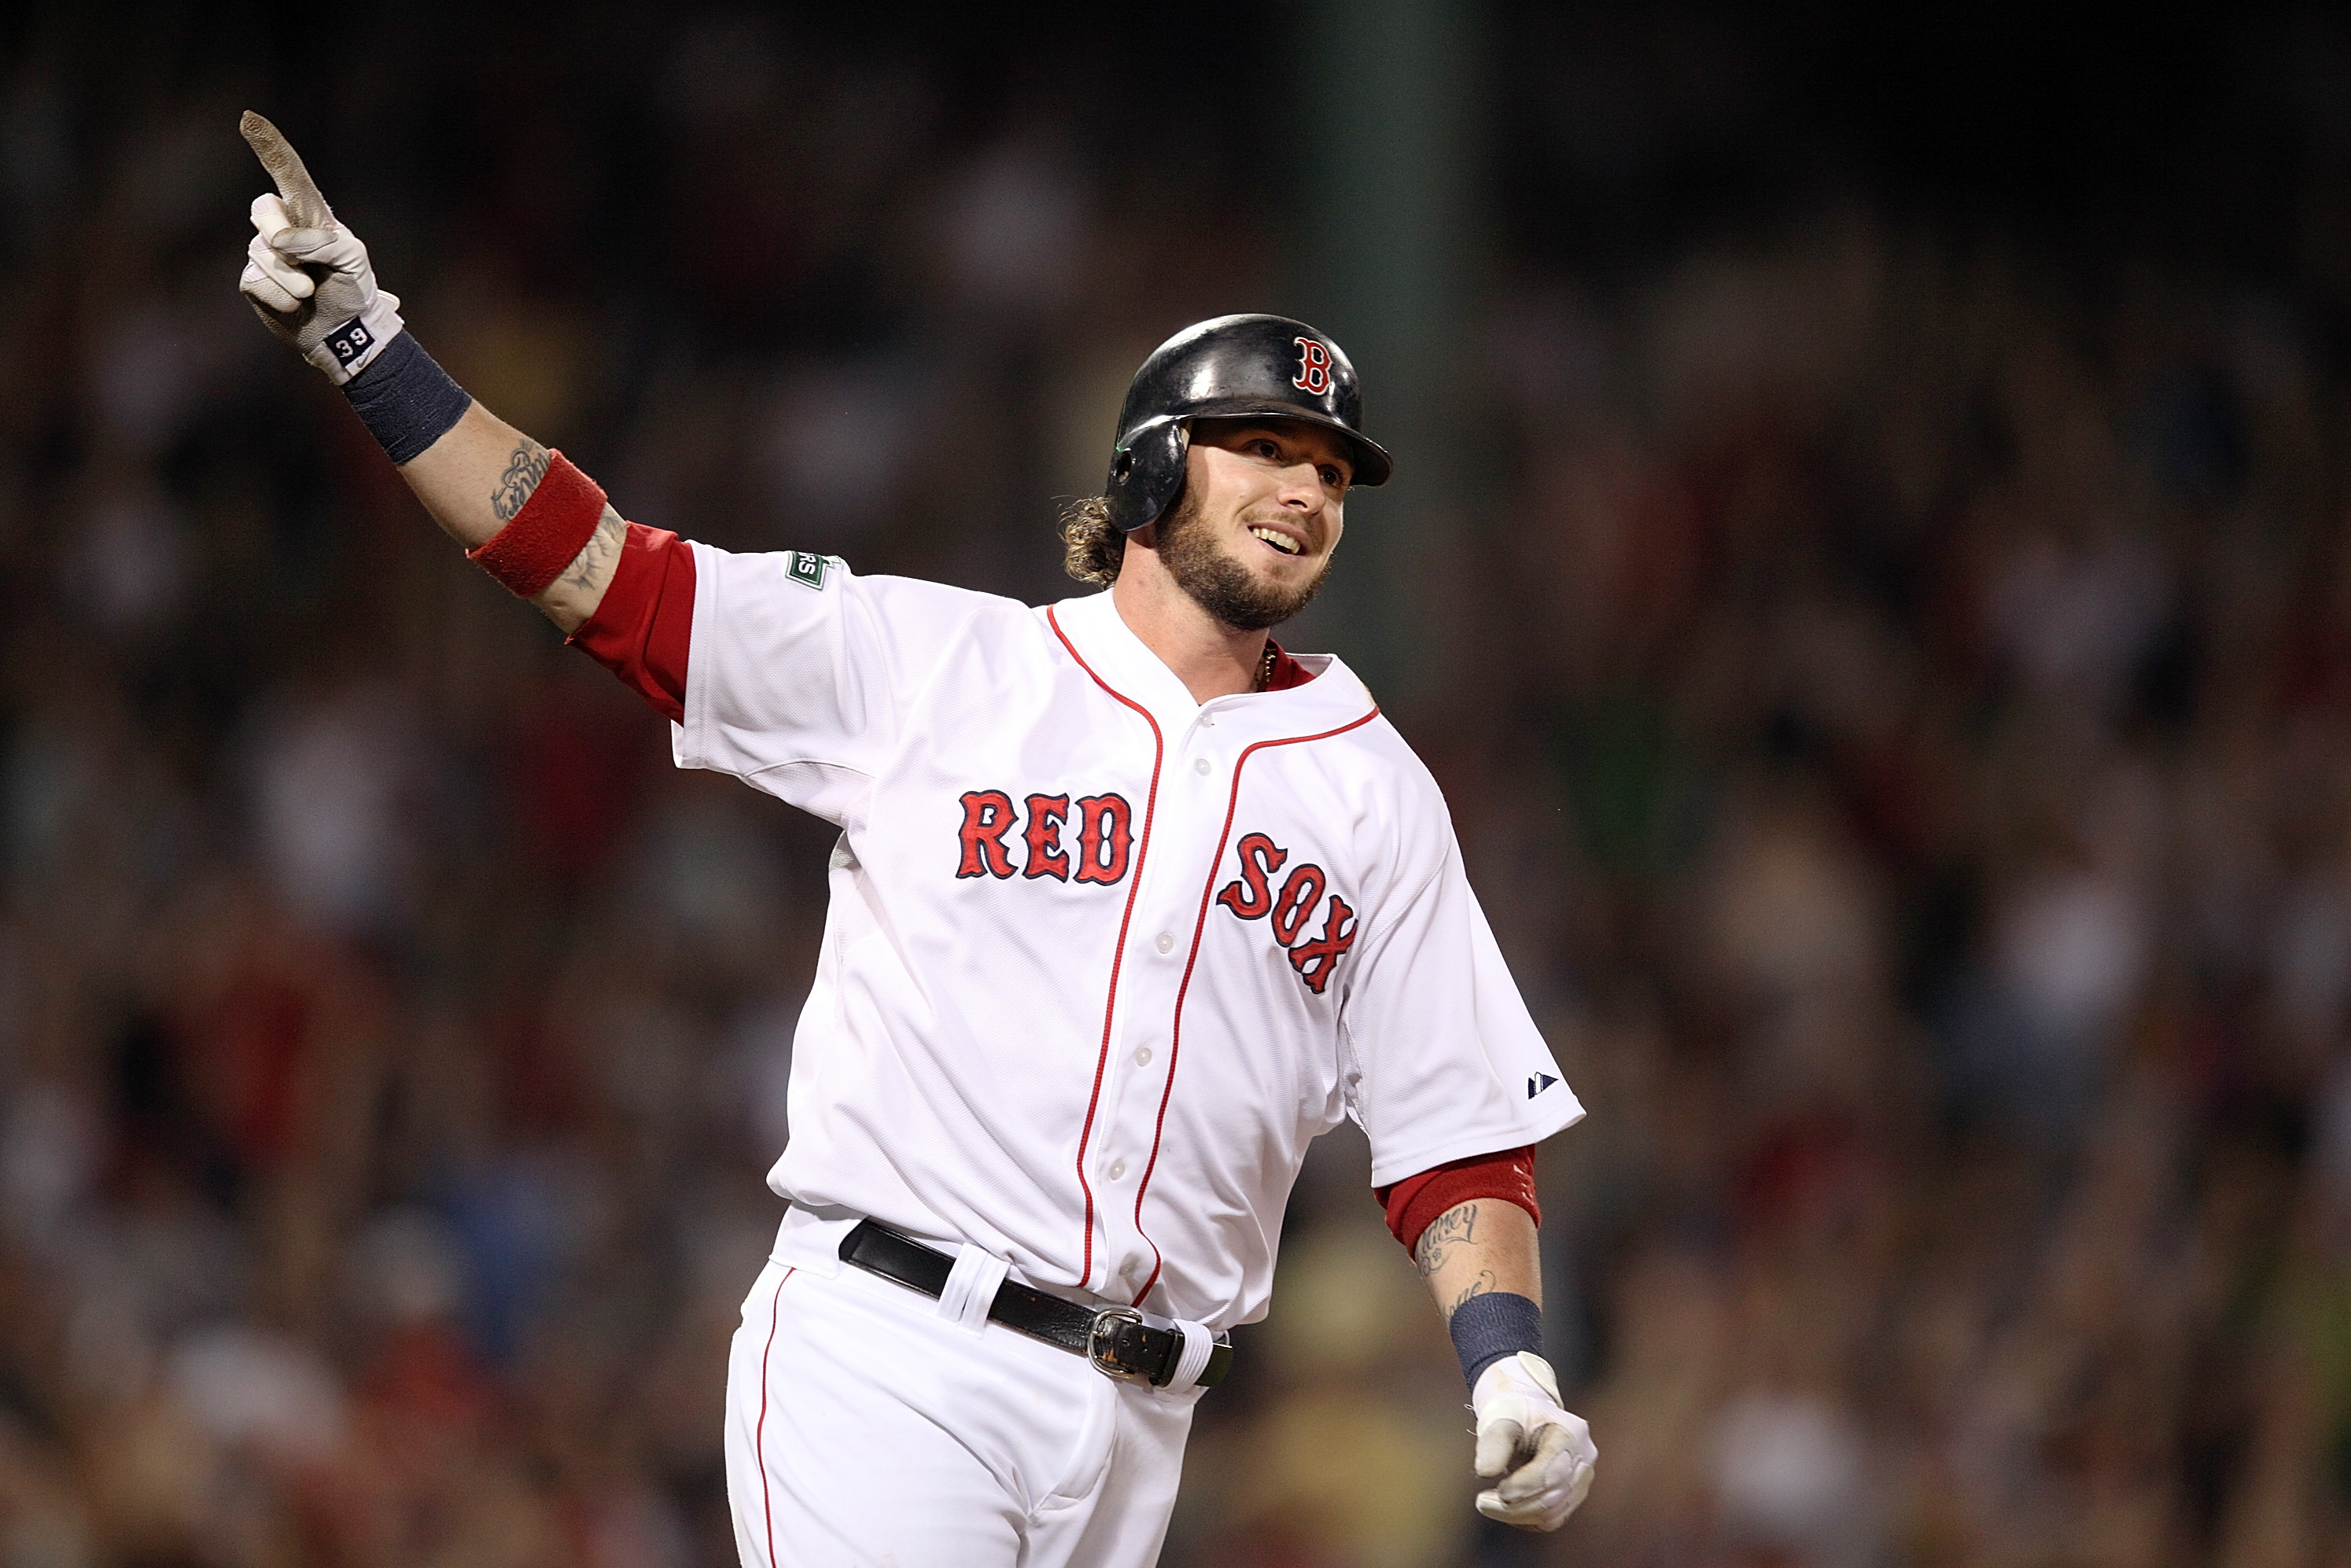 Boston Red Sox: Jarrod Saltalamacchia Not Getting the Credit He Deserves, News, Scores, Highlights, Stats, and Rumors